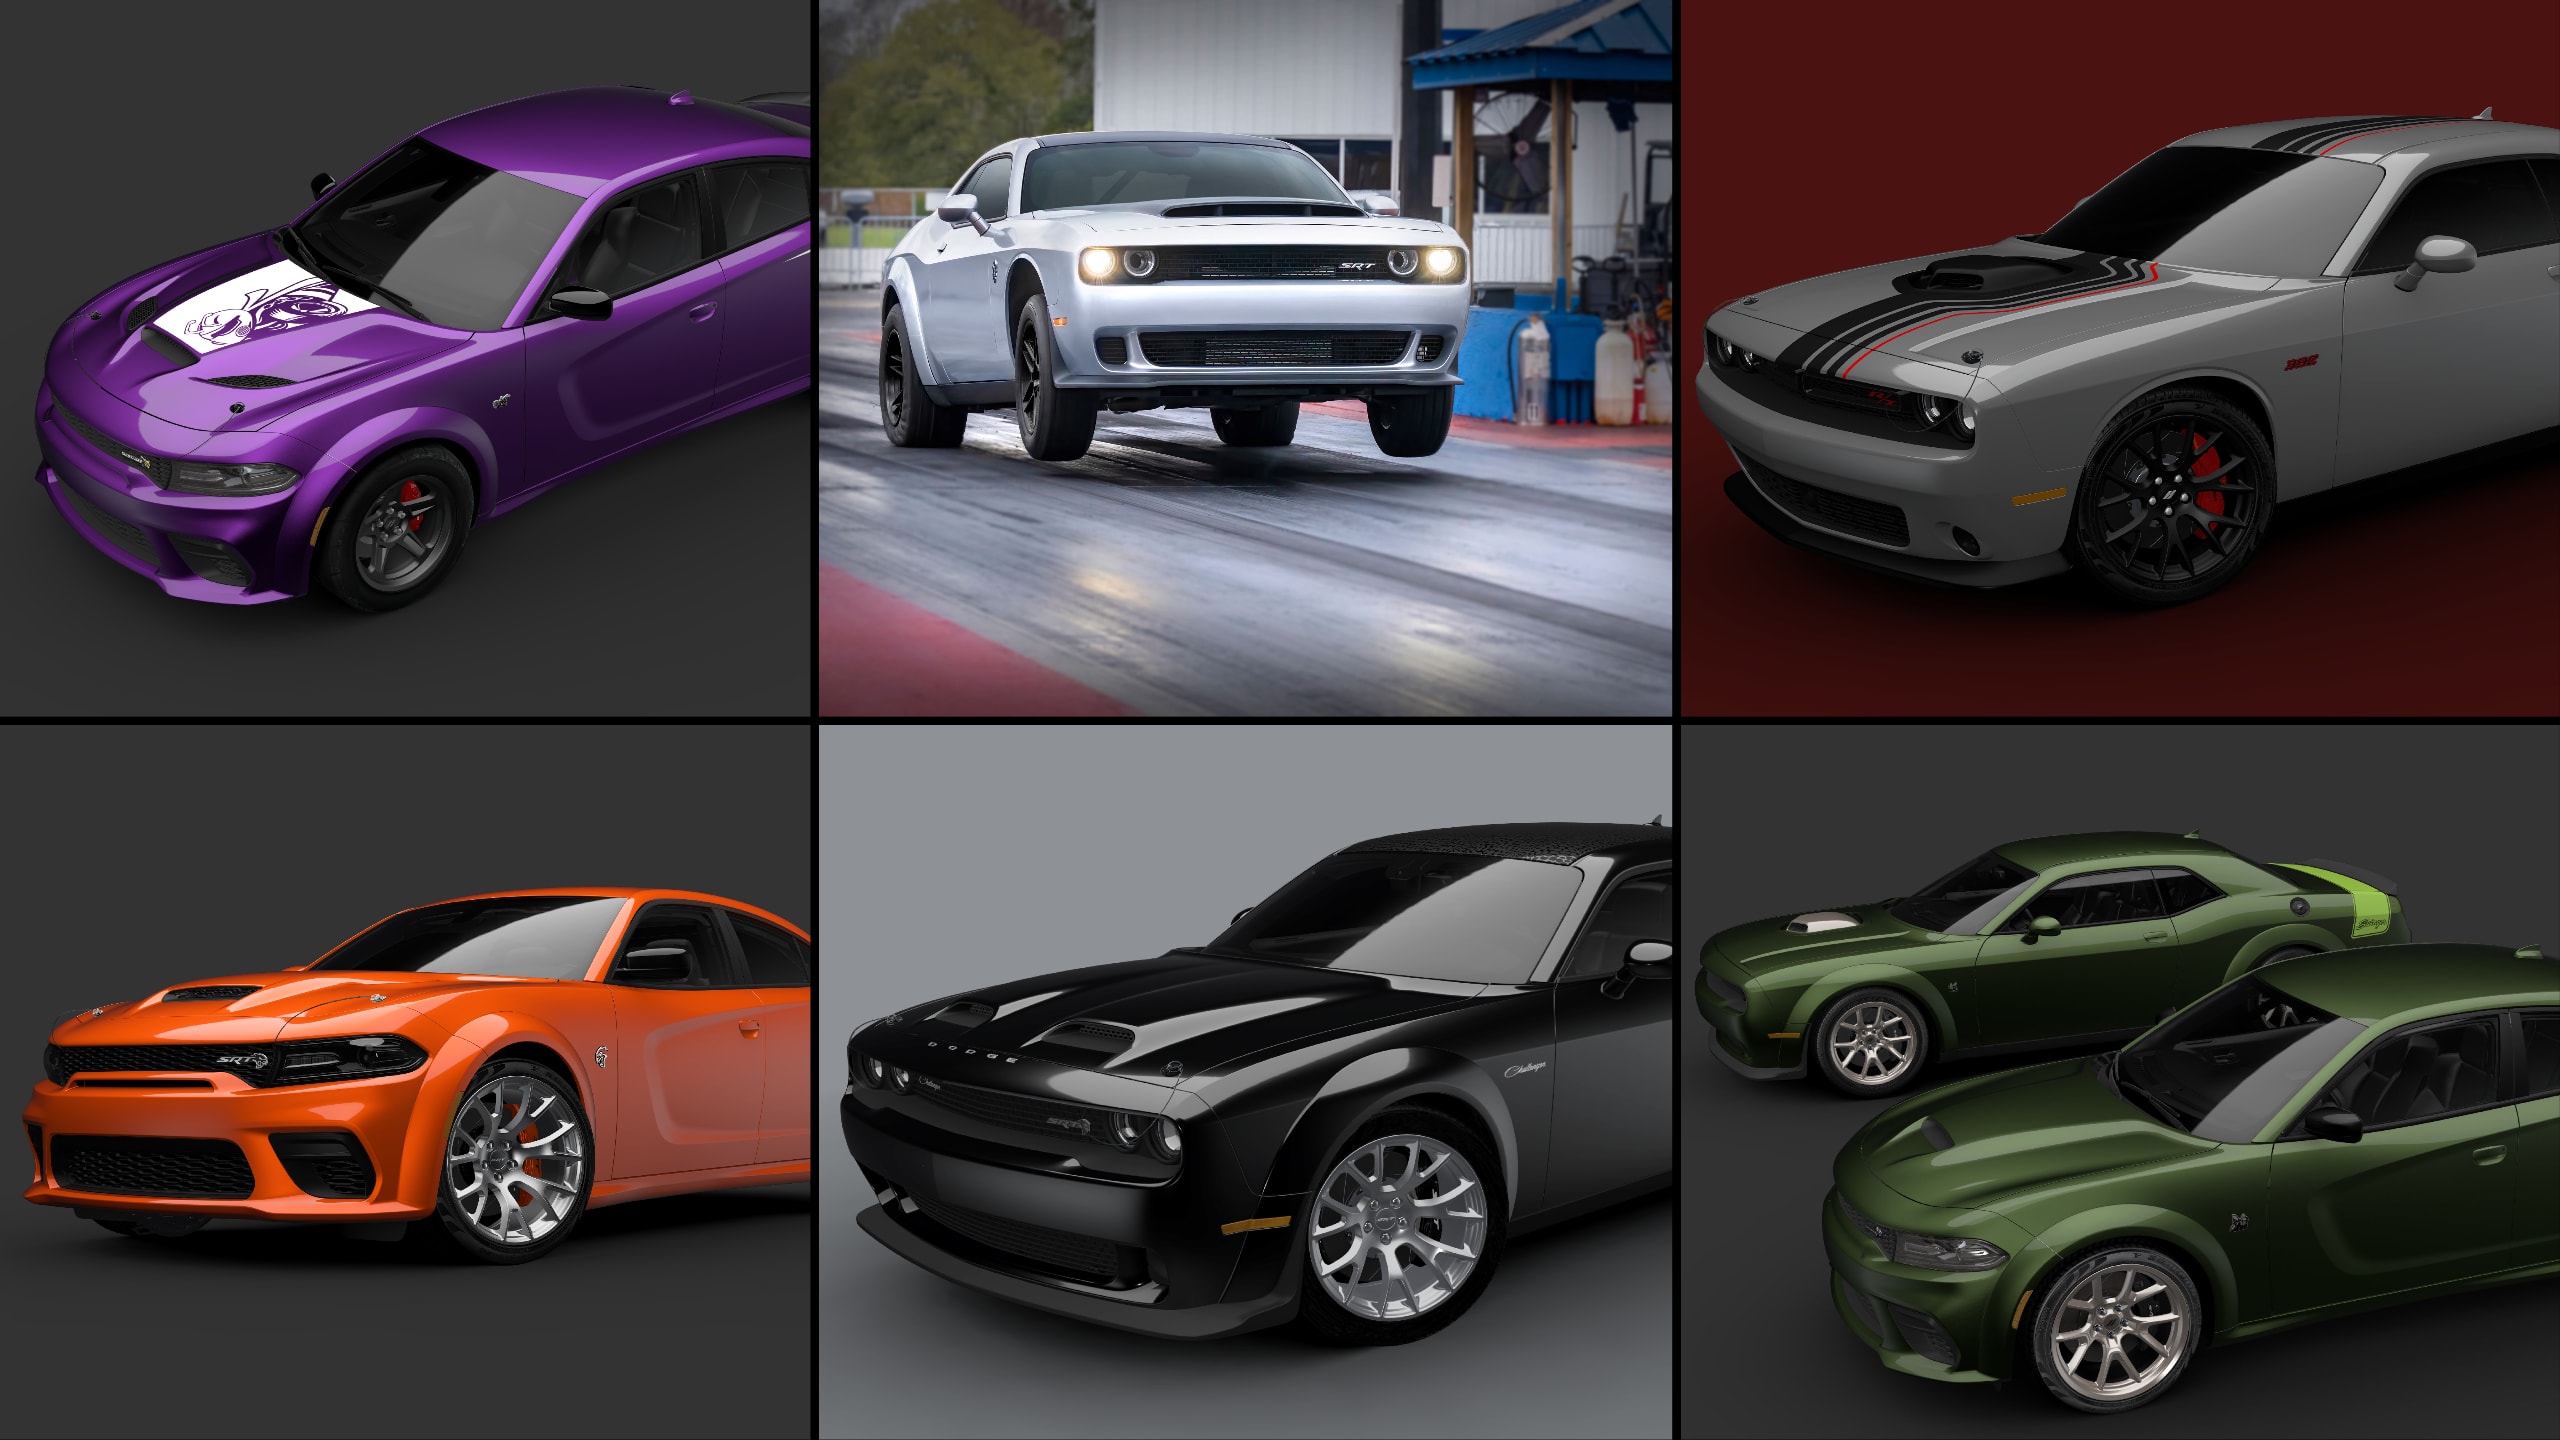 Ranking Every Last Call Dodge Challenger And Charger Based On Their “Dodge-ness” 